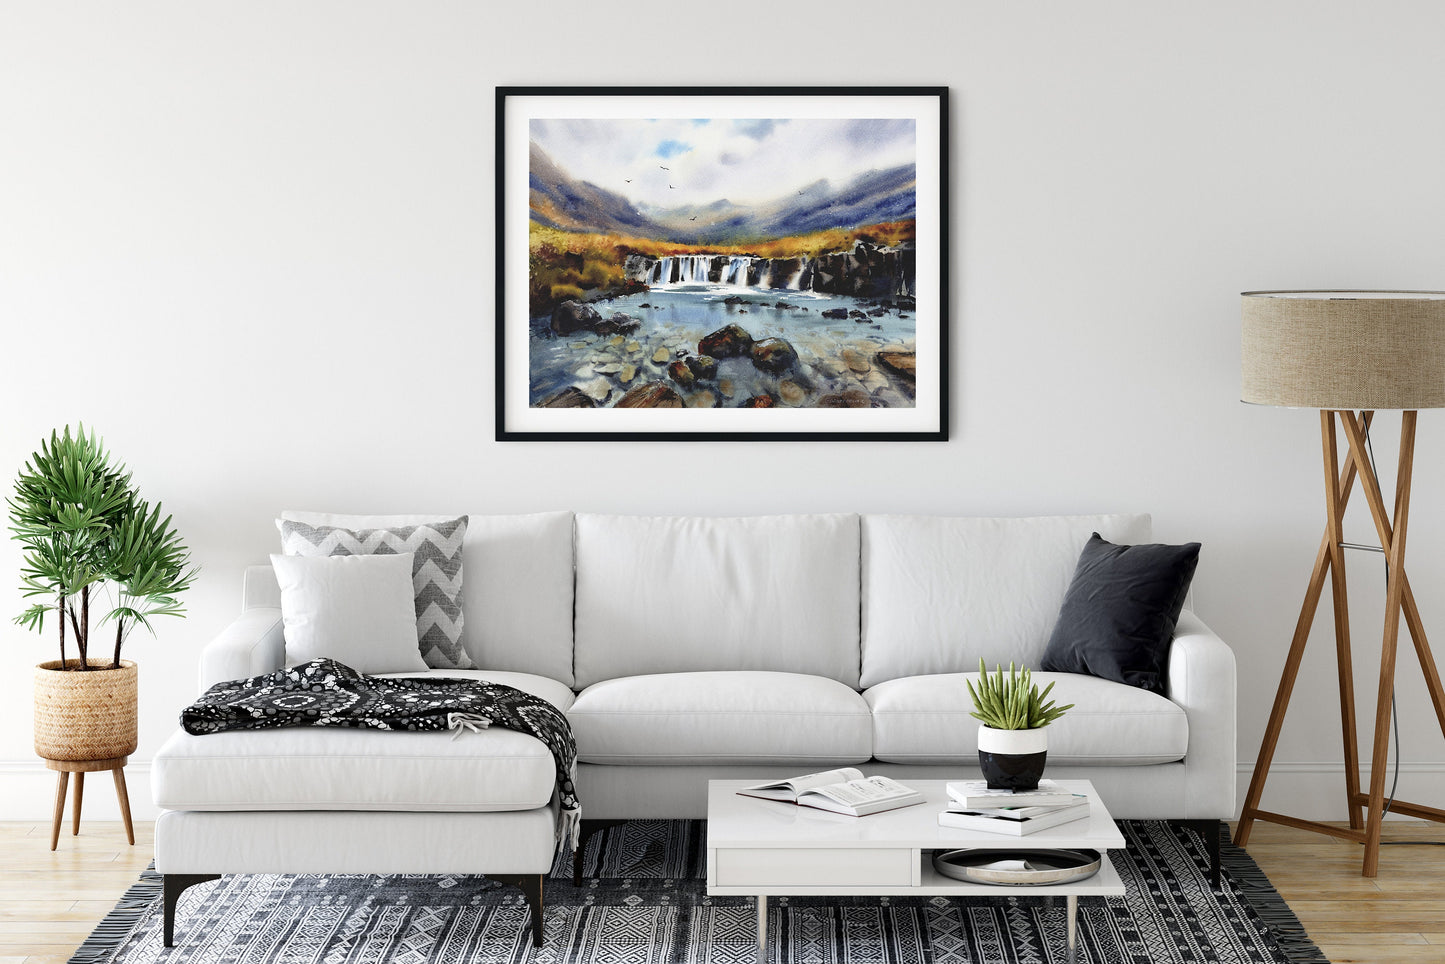 Nordic Landscape, Waterfalls, Icelandic Wall Art, Mountain Waterfall, Abstract Watercolor Painting, Large Canvas Print